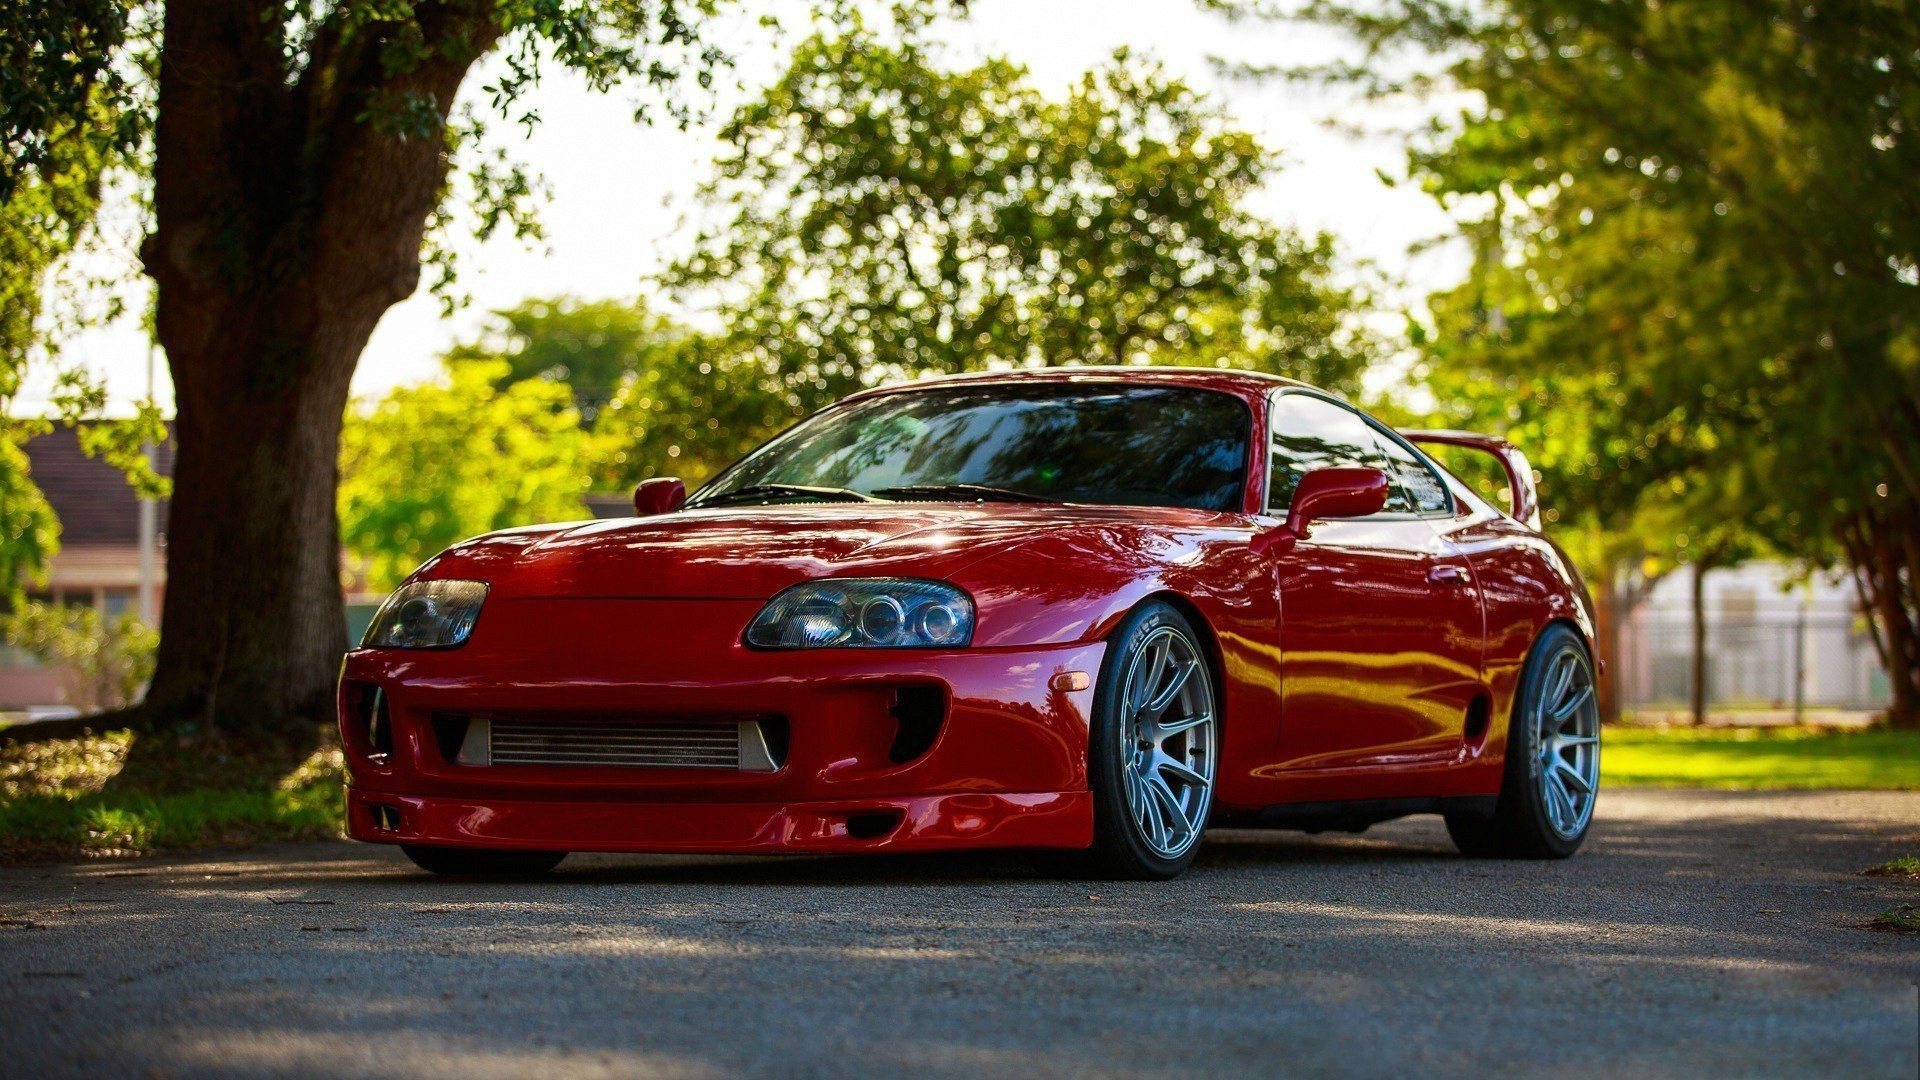 Red Toyota Supra wallpapers and images – wallpapers, pictures, photos